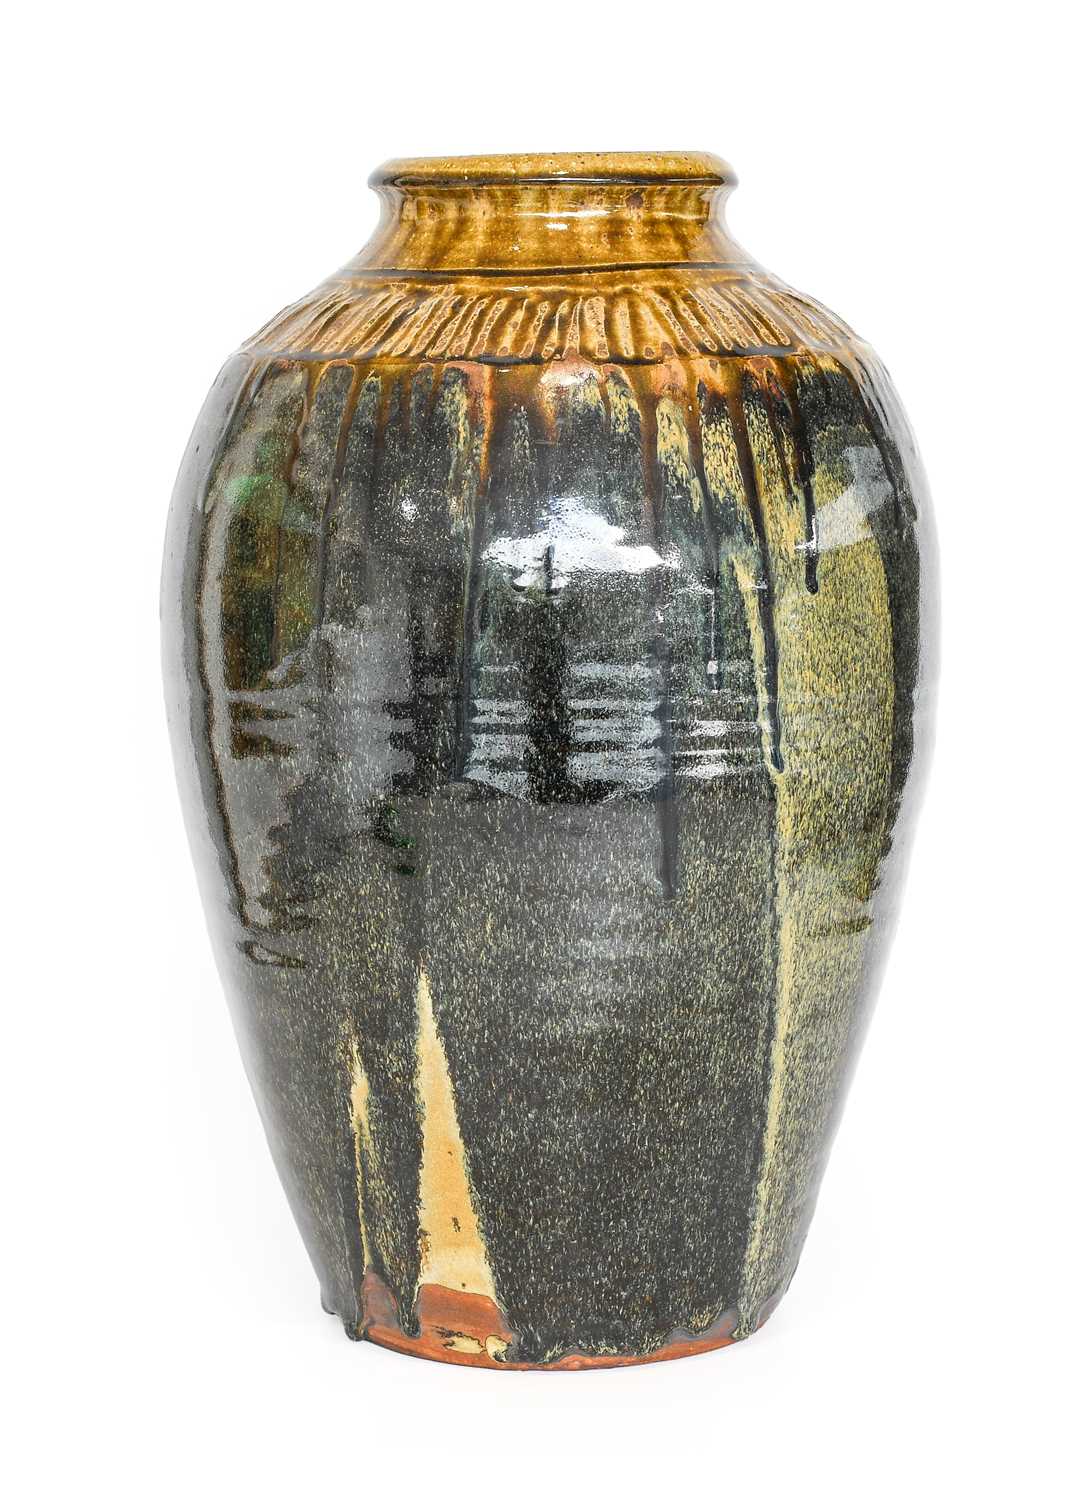 Mike Dodd (b. 1943): A Stoneware Vase, covered in a green ash and tenmoku glaze, unmarked, 39.5cm